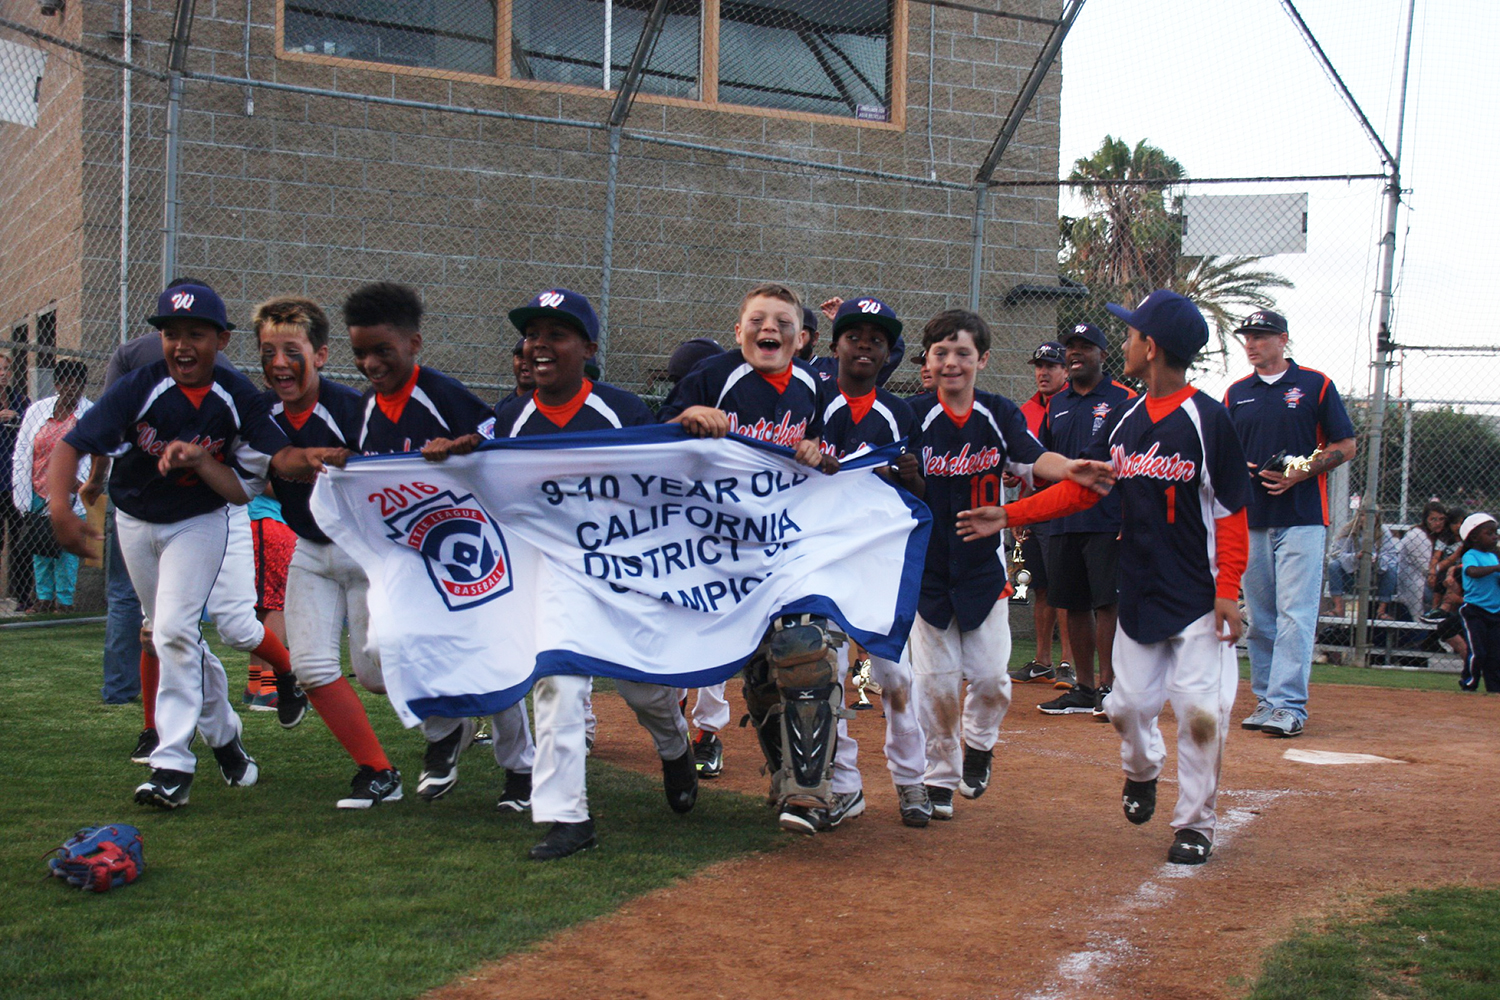 Westchester Little League All-Stars celebrate district championship, trip to state tournament